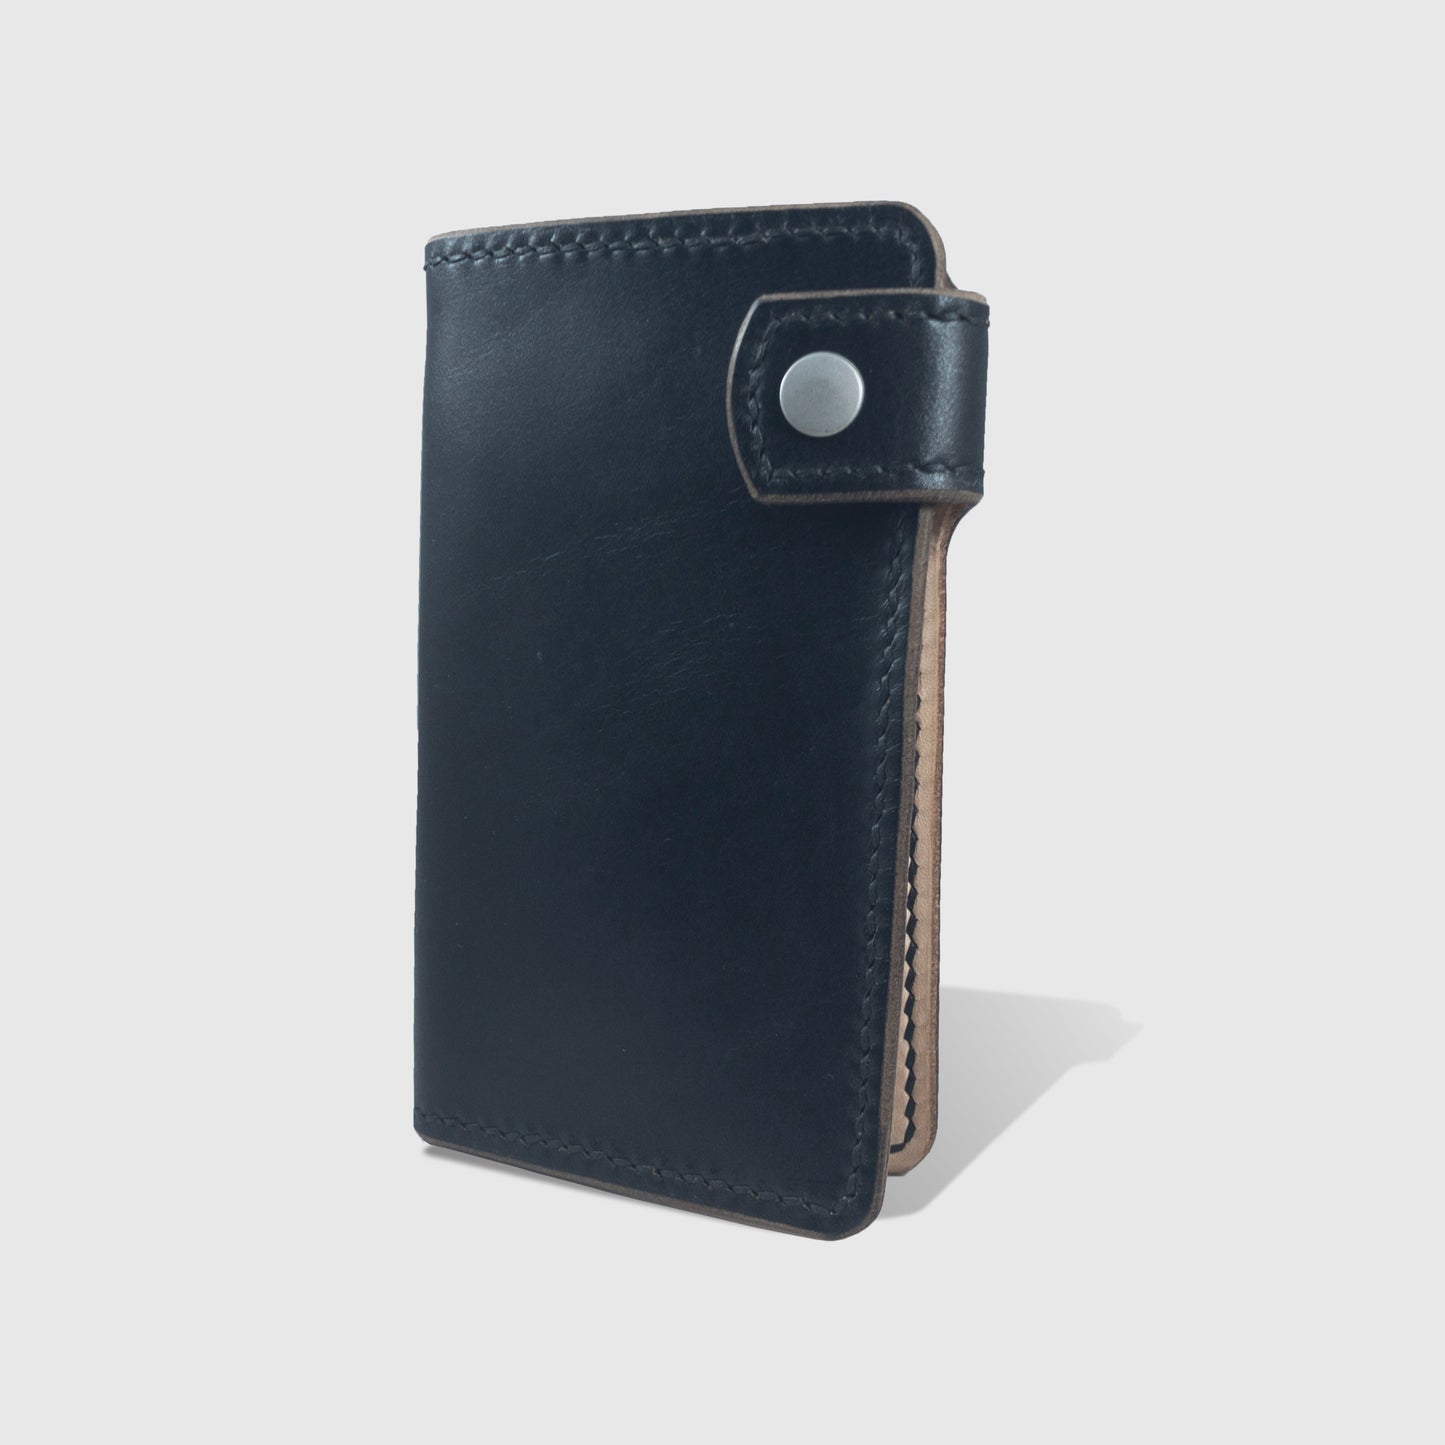 THE MID WALLET - Black